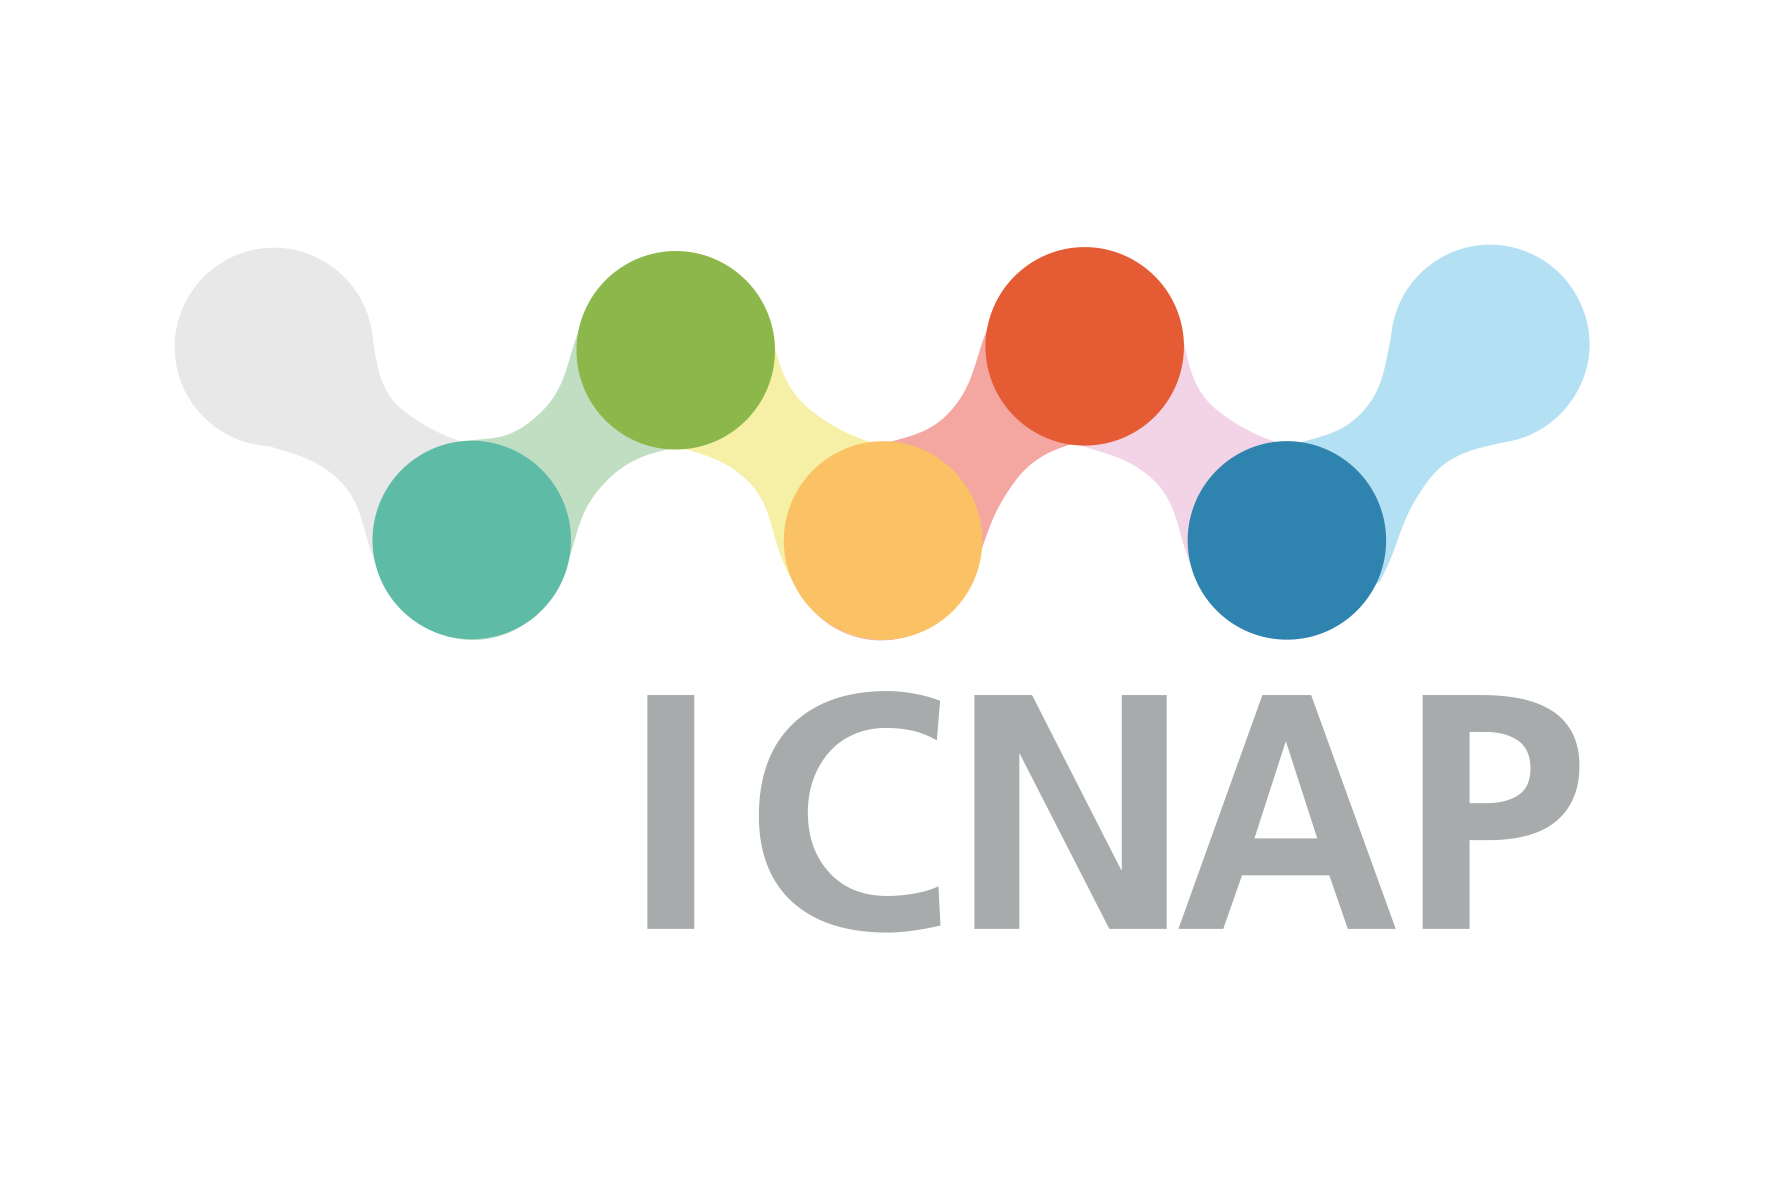 ICNAP emblem consisting of seven circles in different colours